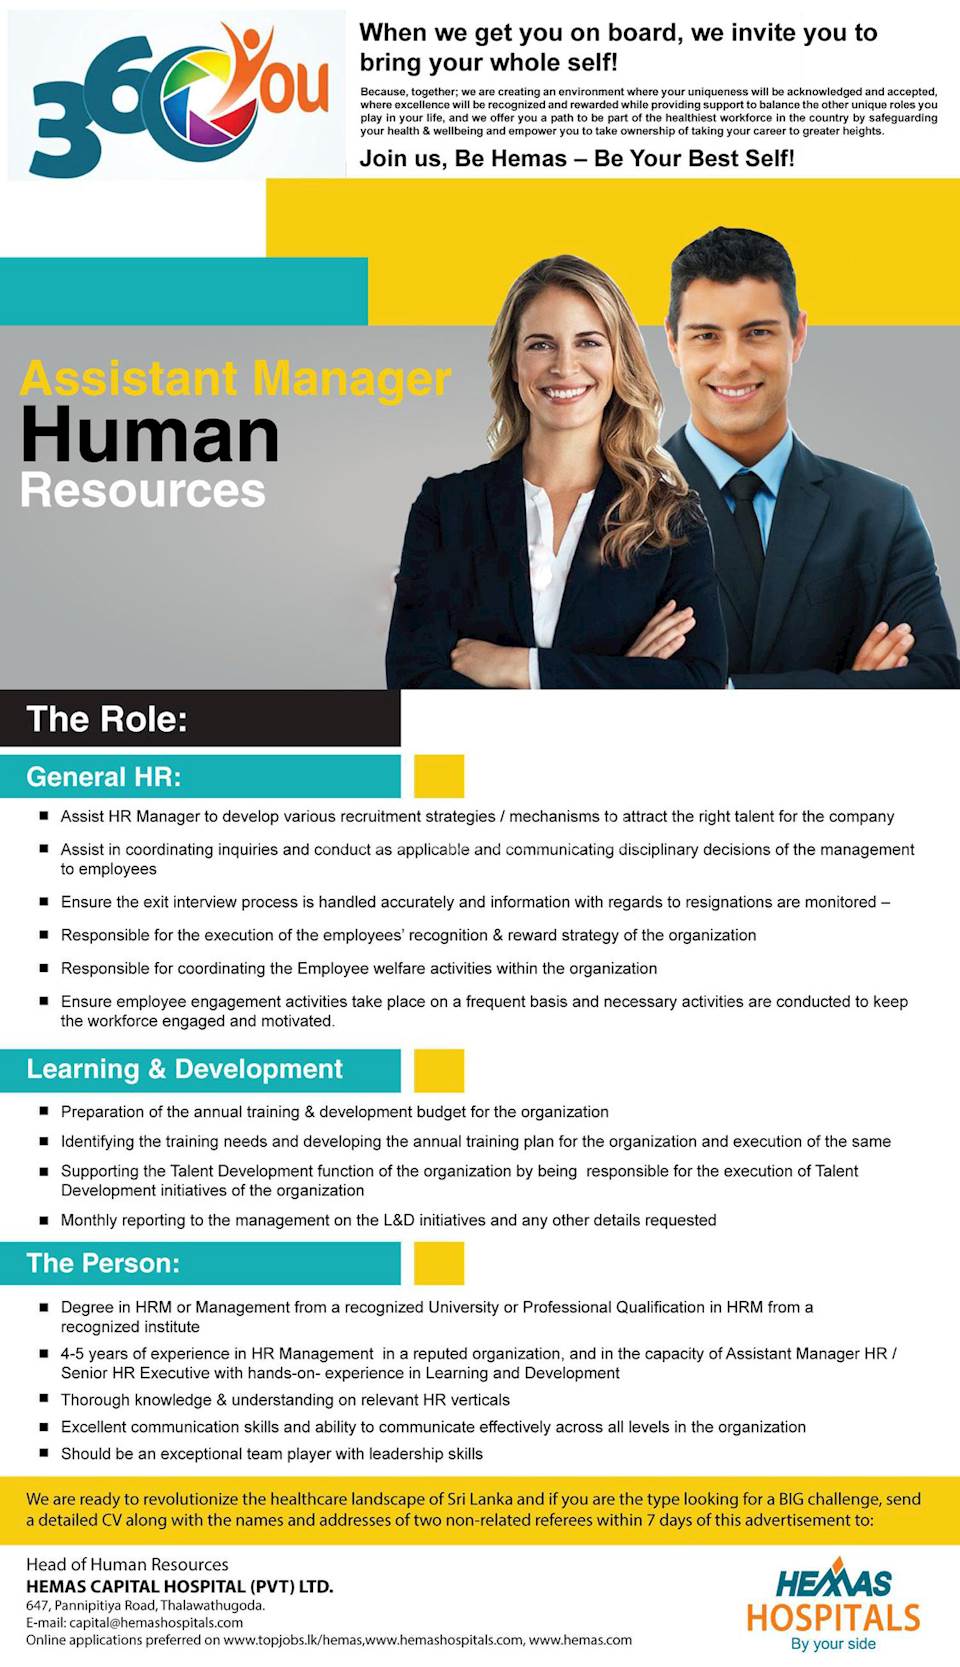 Assistant Manager - Human Resources 